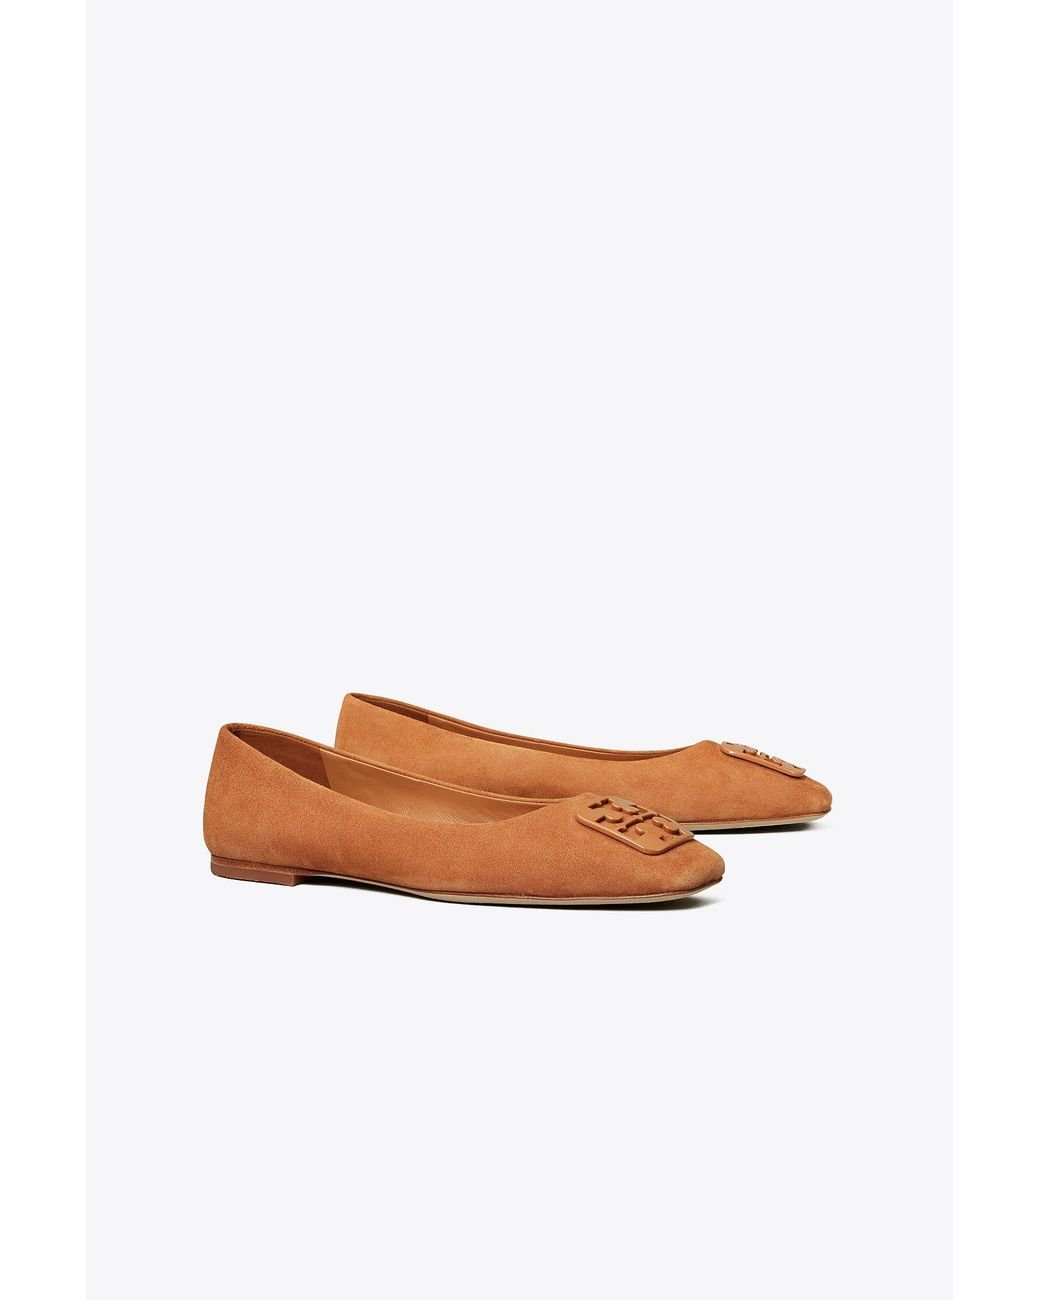 Tory Burch Georgia Ballet Flat, Extended Width in Brown | Lyst